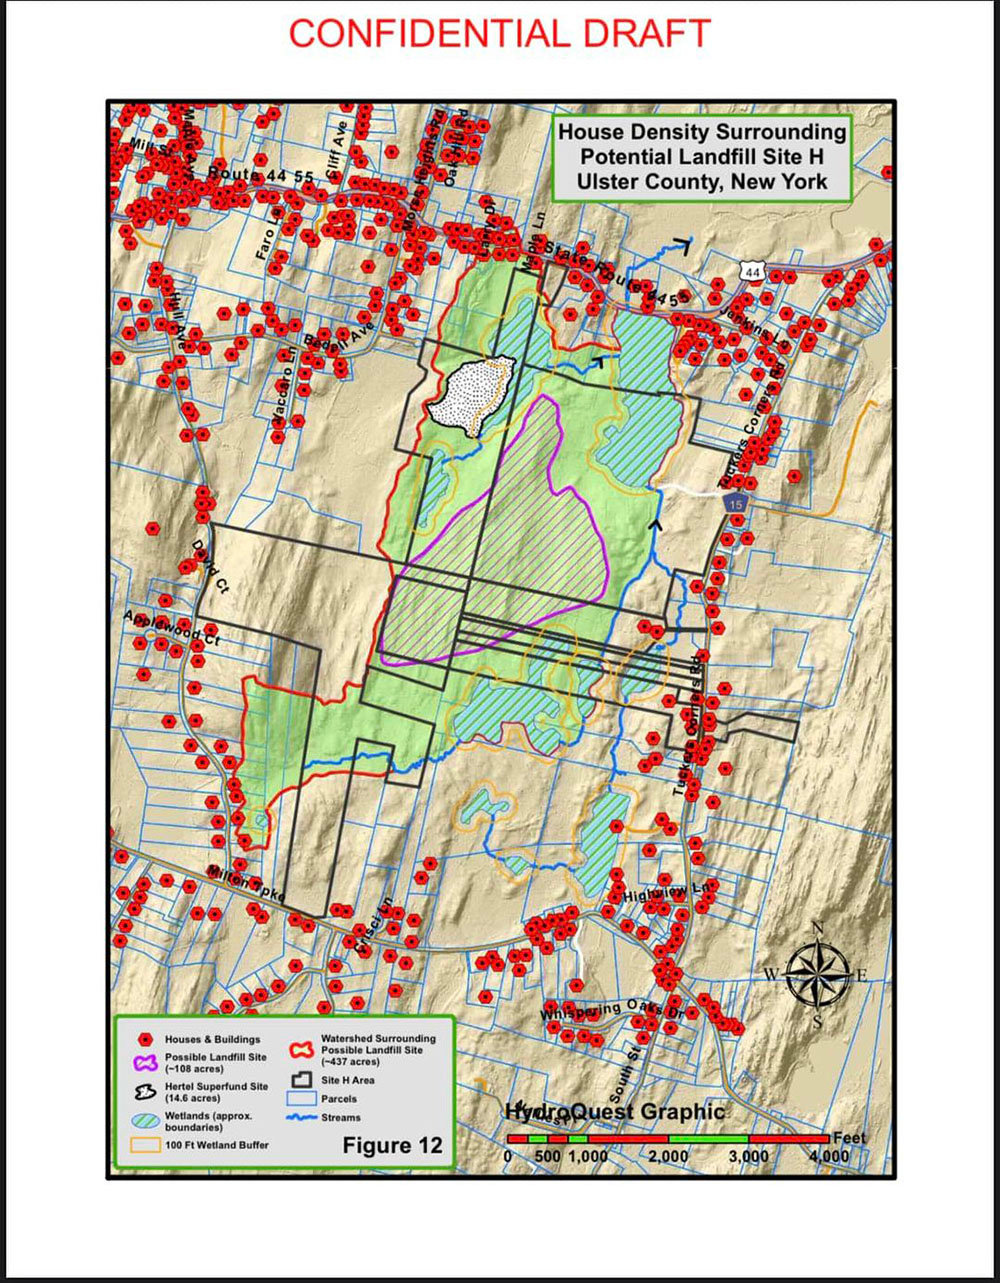 HydroQuest  chart showing housing density of a potential landfill site.